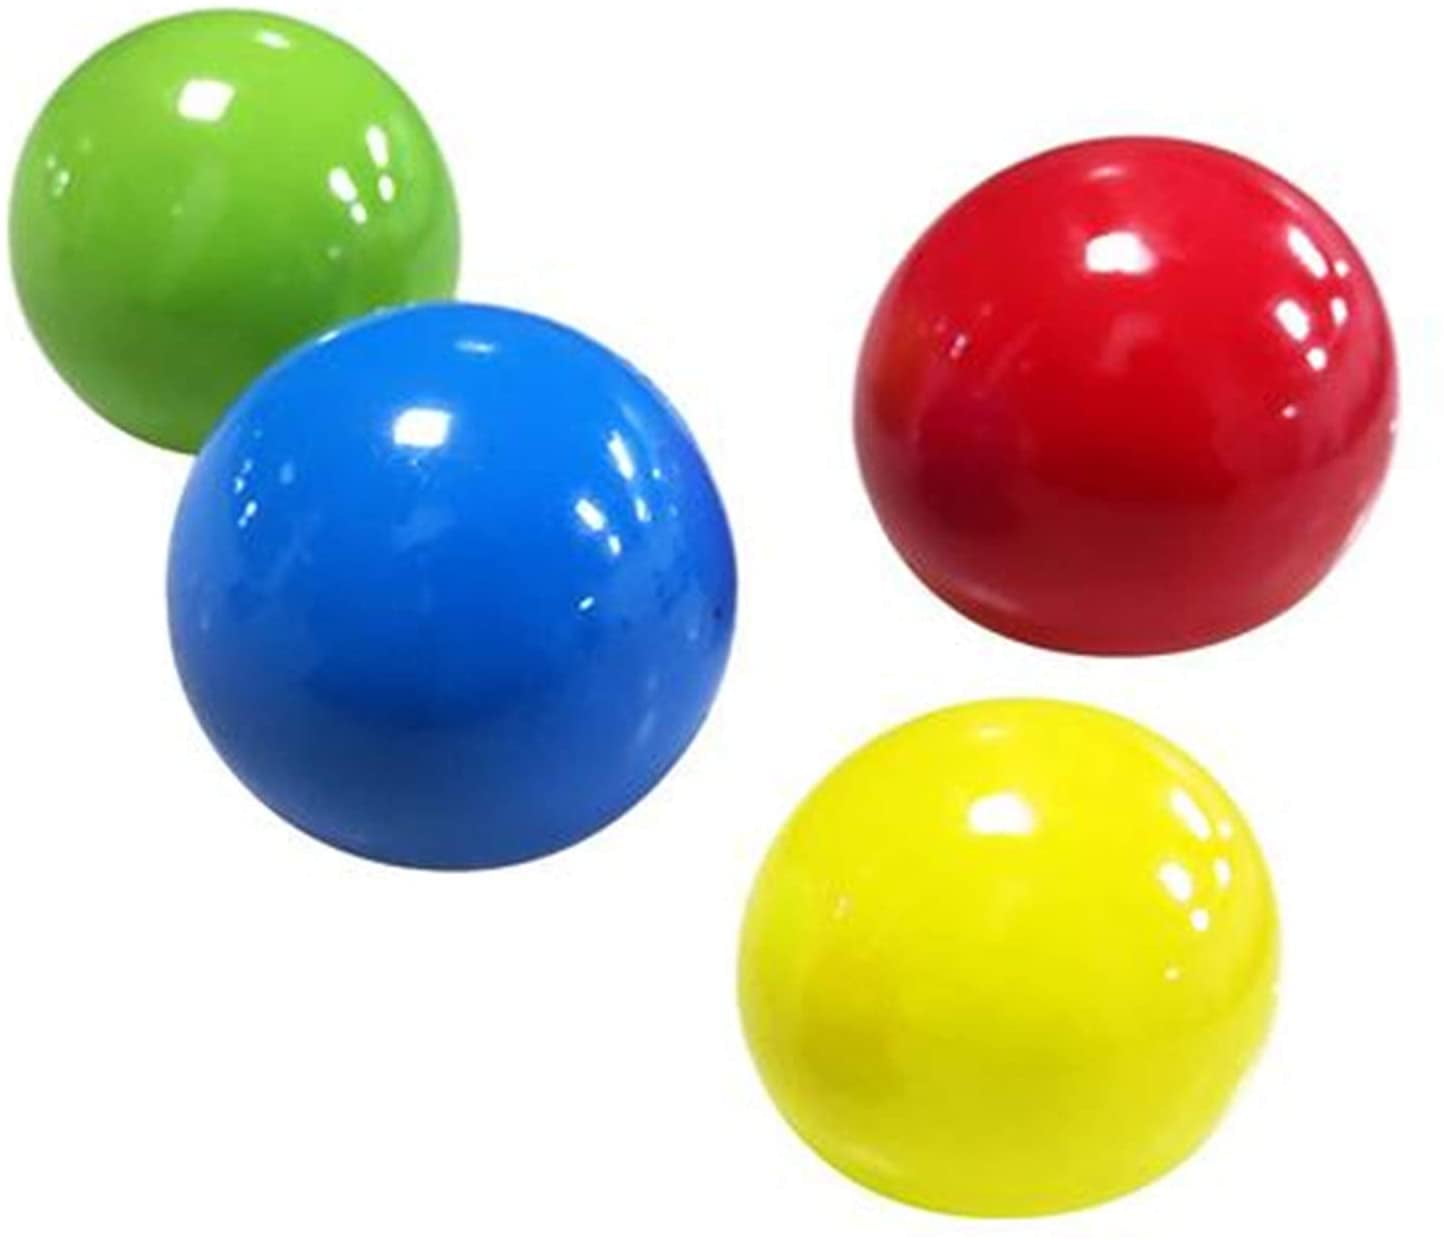 Sticky Wall Ball Cognitive Ability Cultivation Stress Relieve Toy Sticky Target Ball Sticky Globbles Ball Safe For Children Decompression Wall Balls For Adult Children Luminous Sticky Balls 